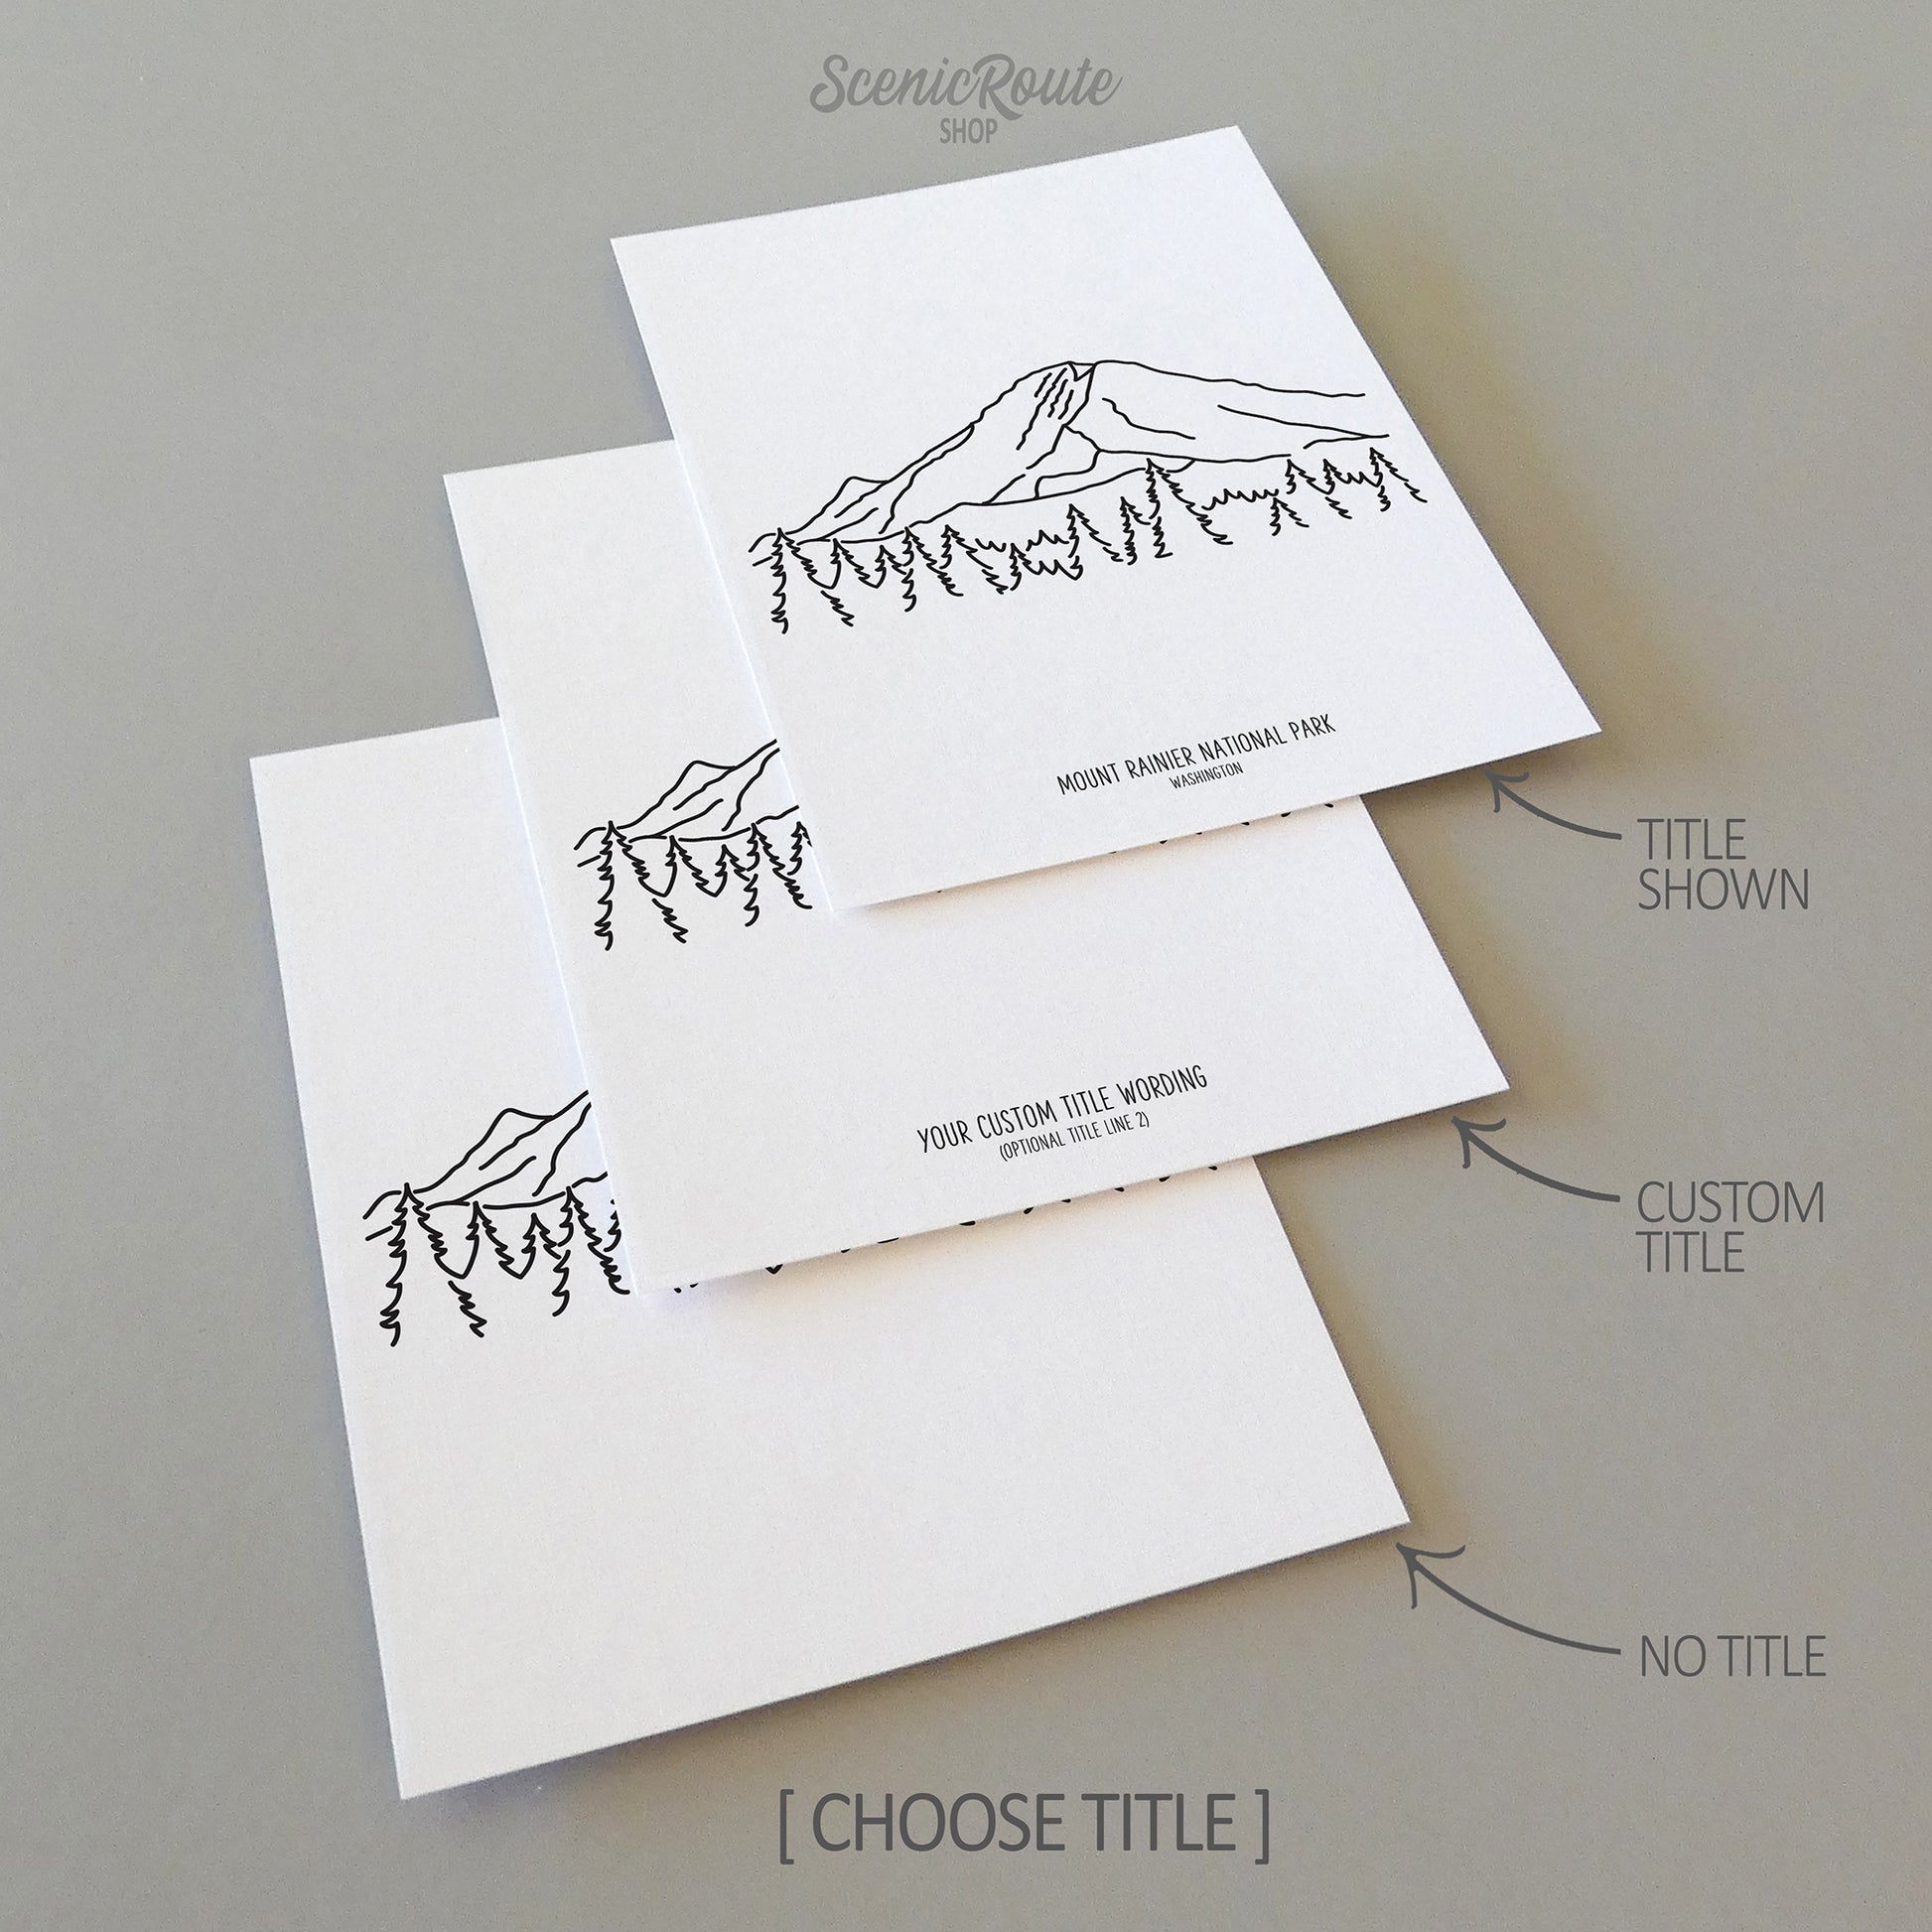 Three line art drawings of Mount Rainier National Park on white linen paper with a gray background. The pieces are shown with title options that can be chosen and personalized.